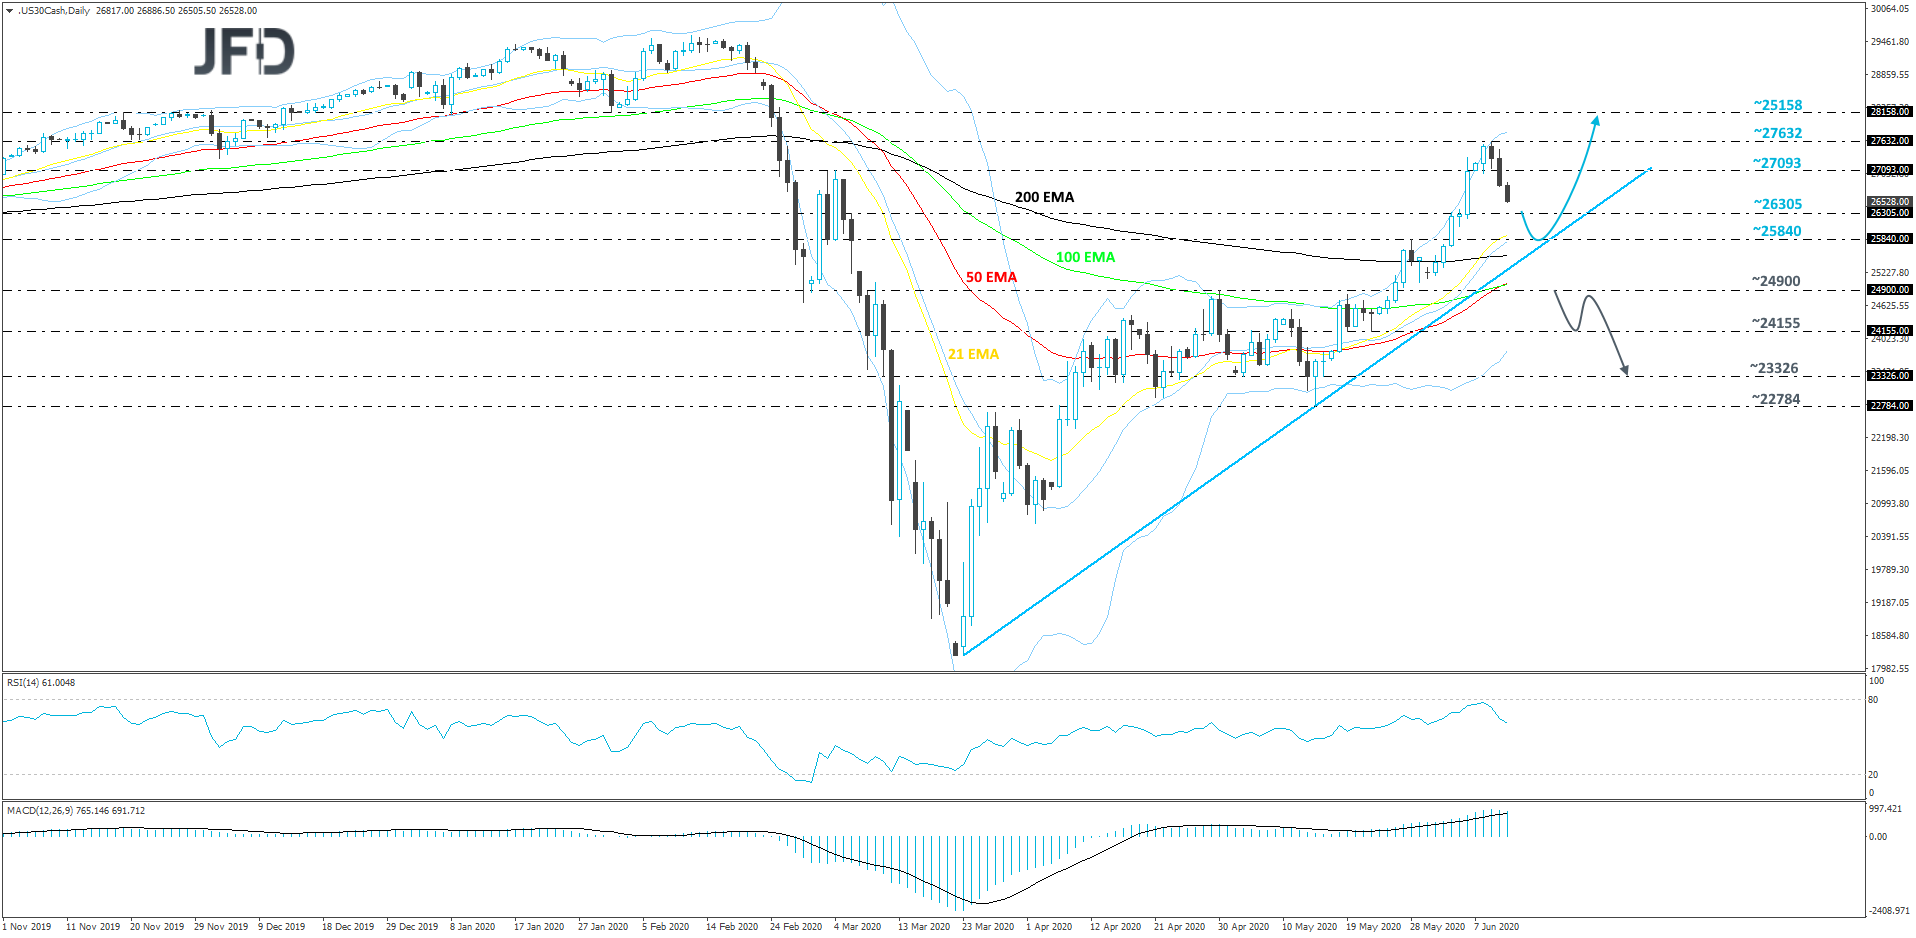 Dow Jones Industrial Average cash index daily chart technical analysis